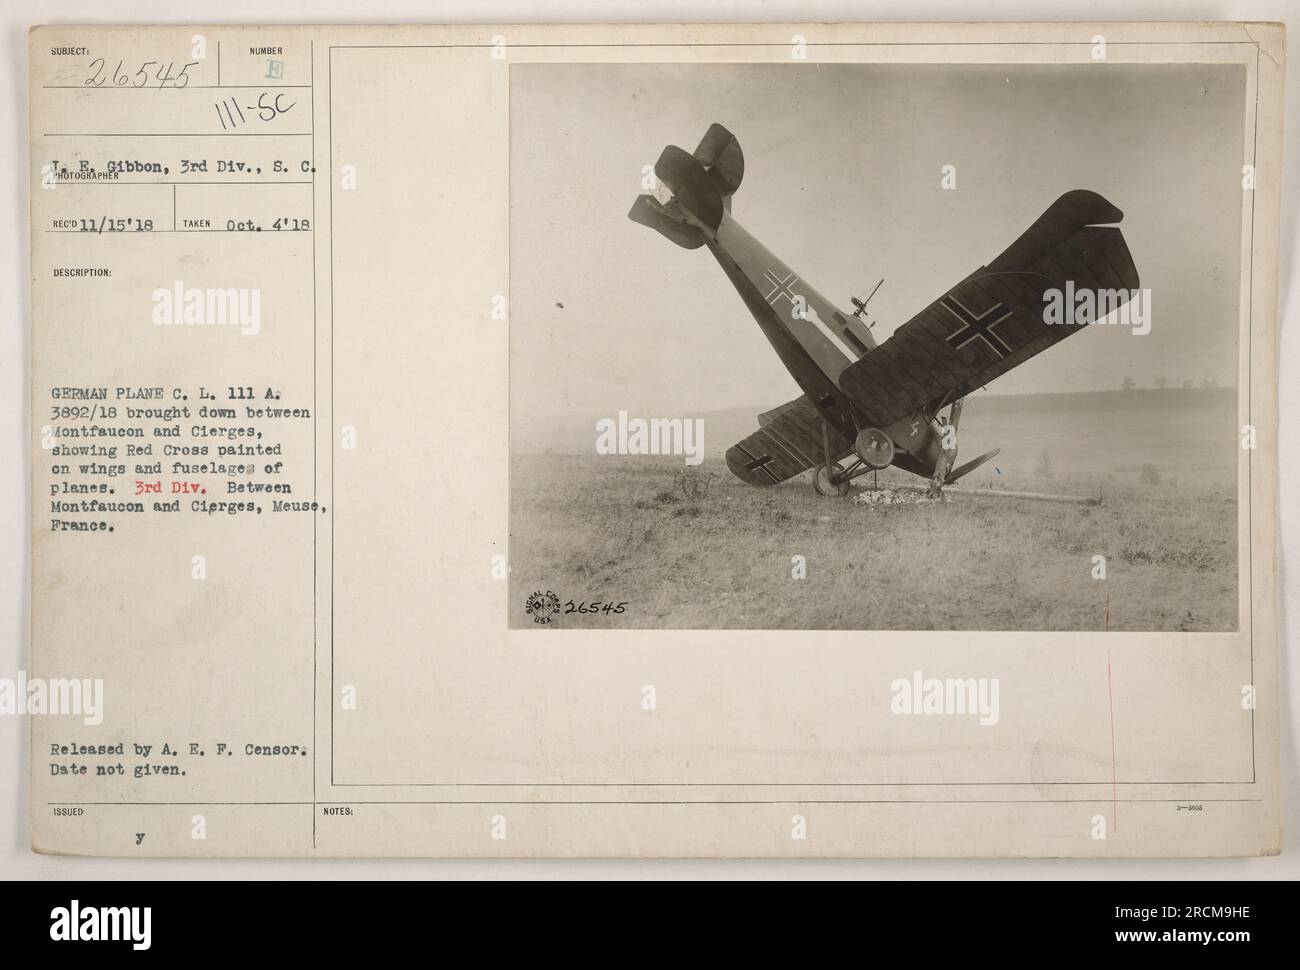 Caption: 'Photograph depicting a German plane brought down between Montfaucon and Cierges, showing a Red Cross painted on the wings and fuselages. Taken on October 4, 1918, by the 3rd Division of the American Expeditionary Forces (A.E.F) in Meuse, France. Released by A.E.F. Censor.' Stock Photo